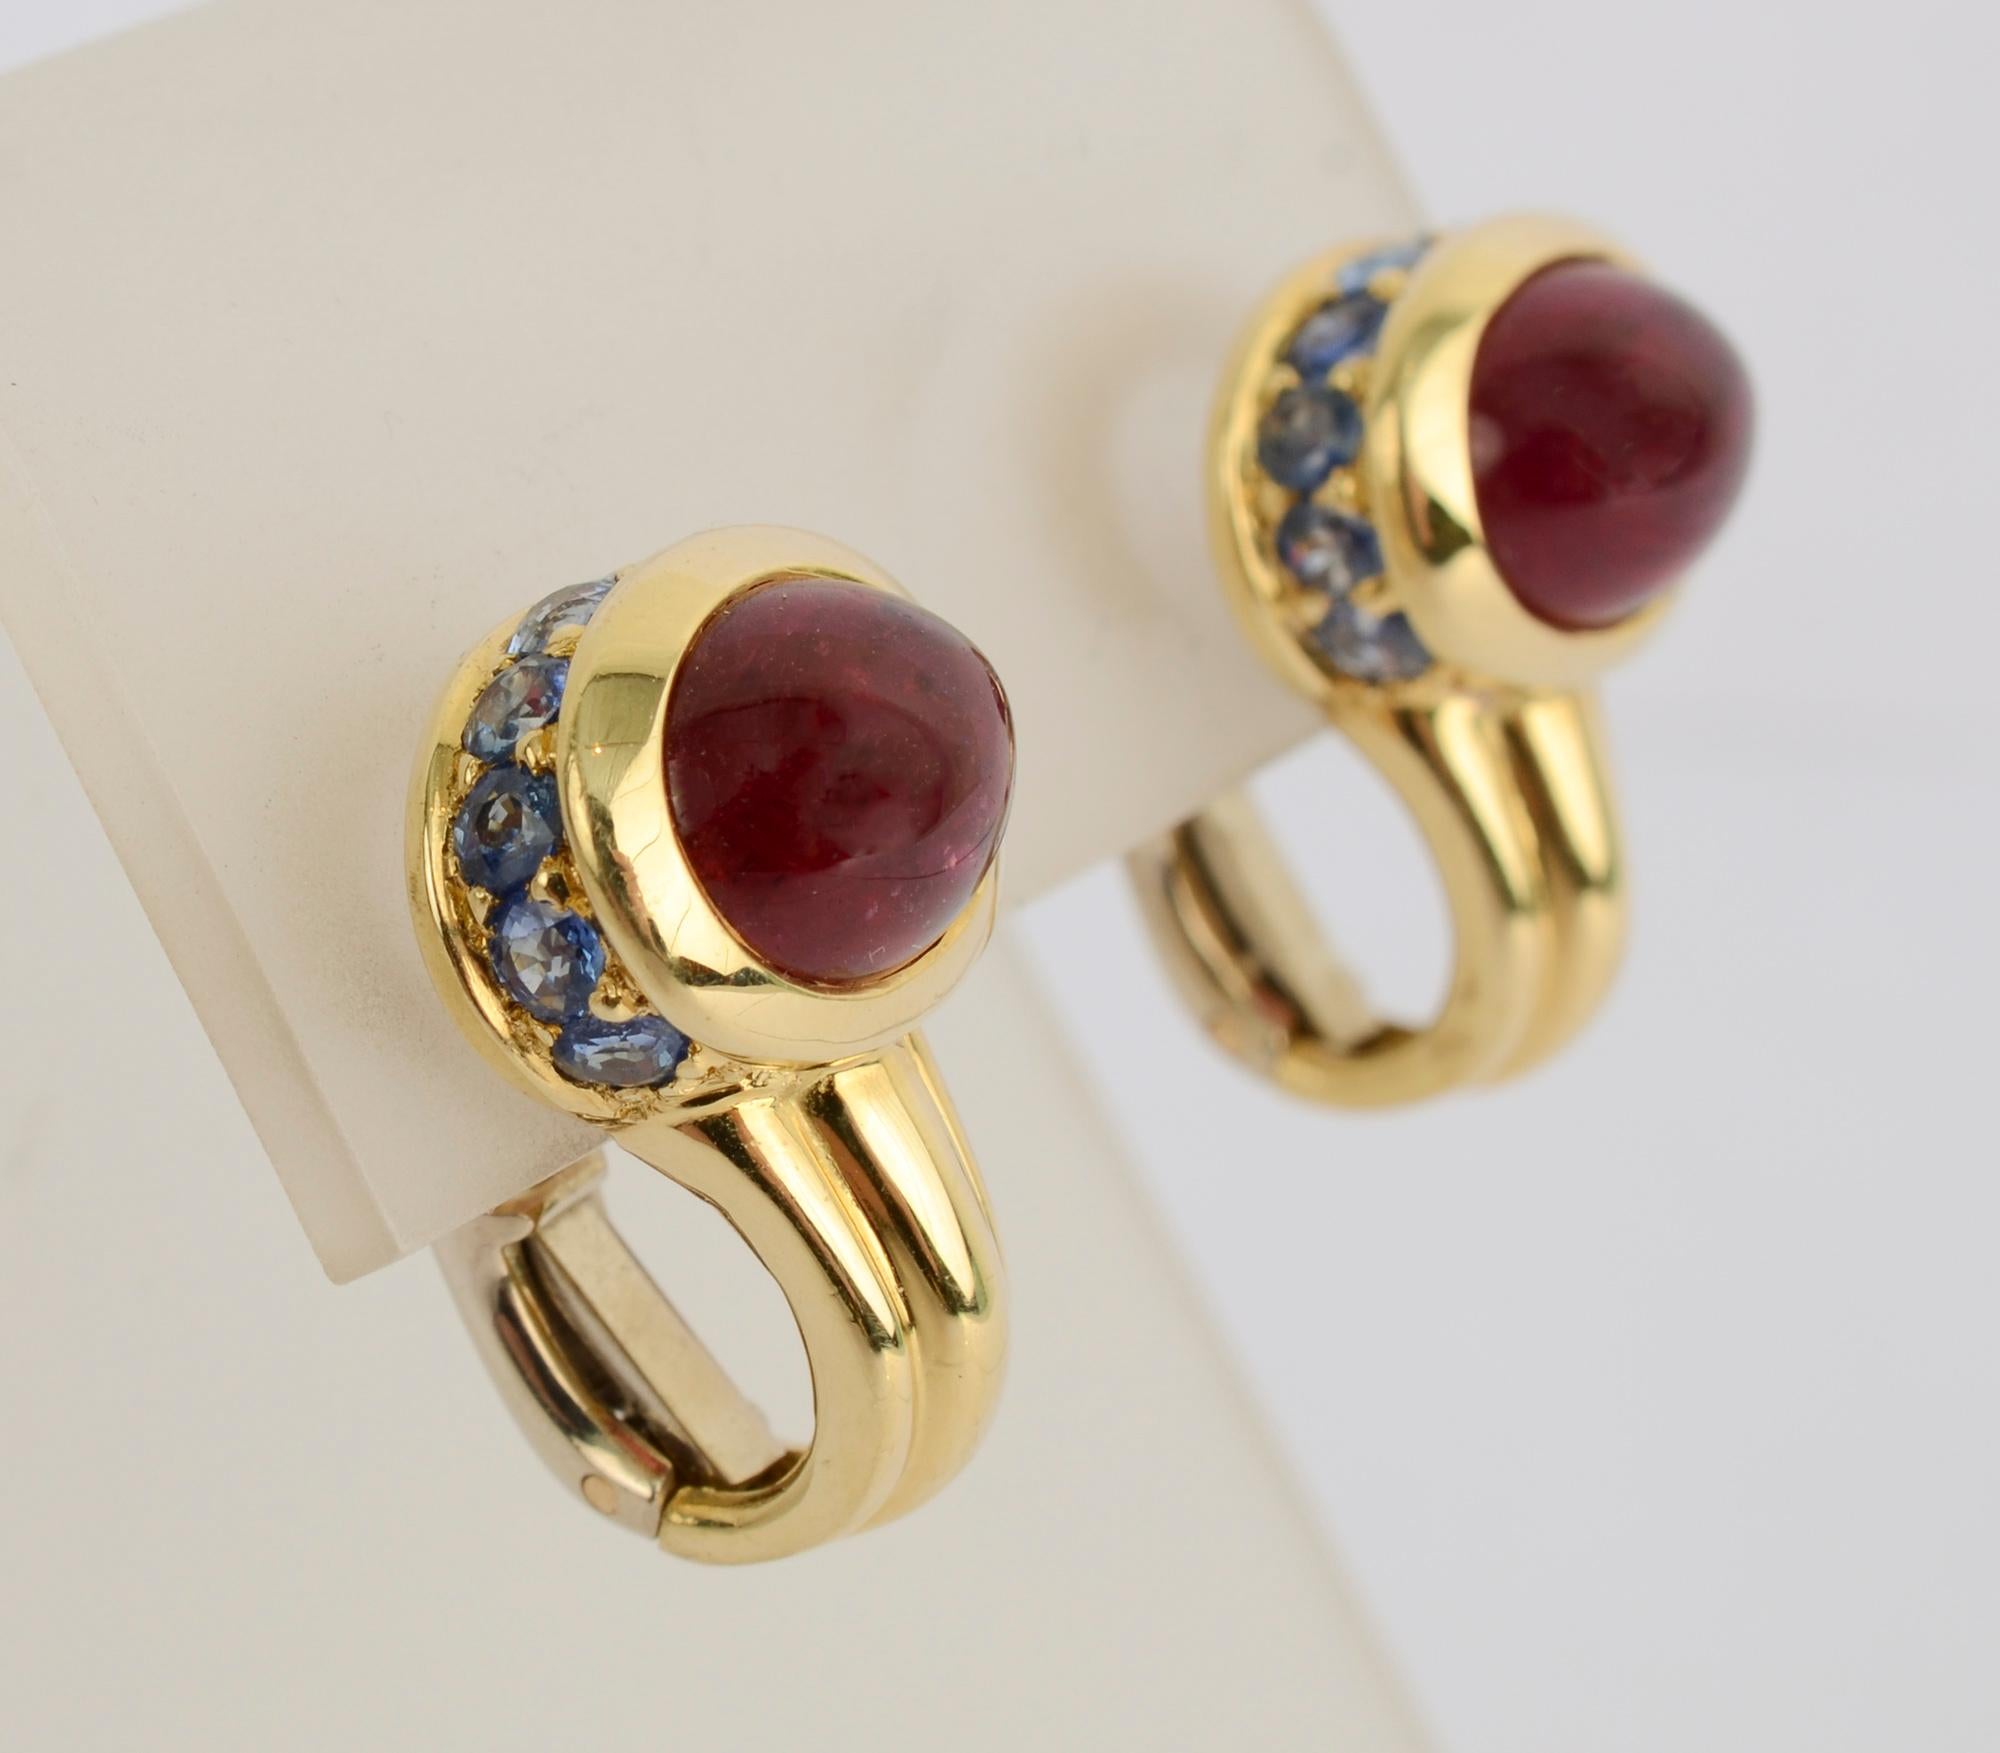 Eighteen karat gold earrings each with an oval  4 karat pink/red tourmaline surrounded by blue kunzites. The two colors combine beautifully together. Backs are posts and clips. The earrings are 7/8 